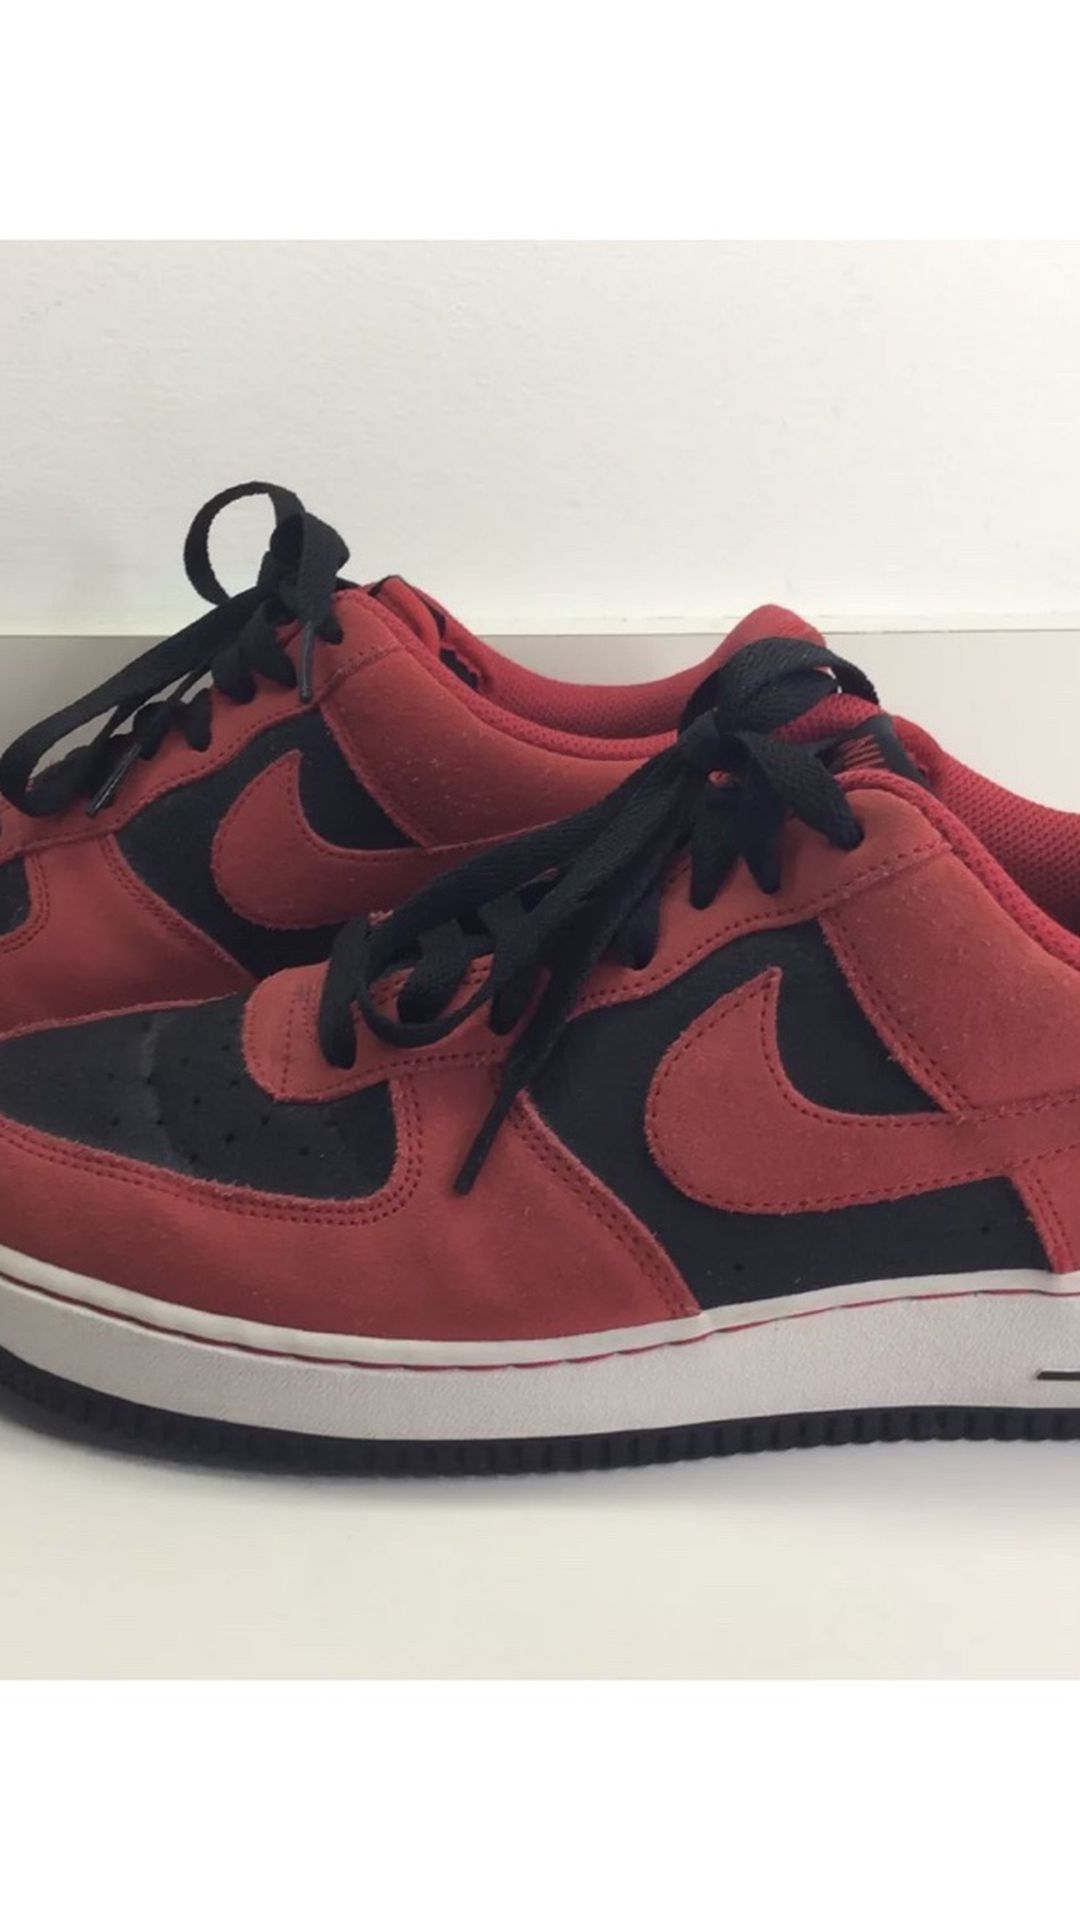 Nike Air Force 1 Low Reverse Suede Shoes Red Black Men Size 10. Air Force One VGC